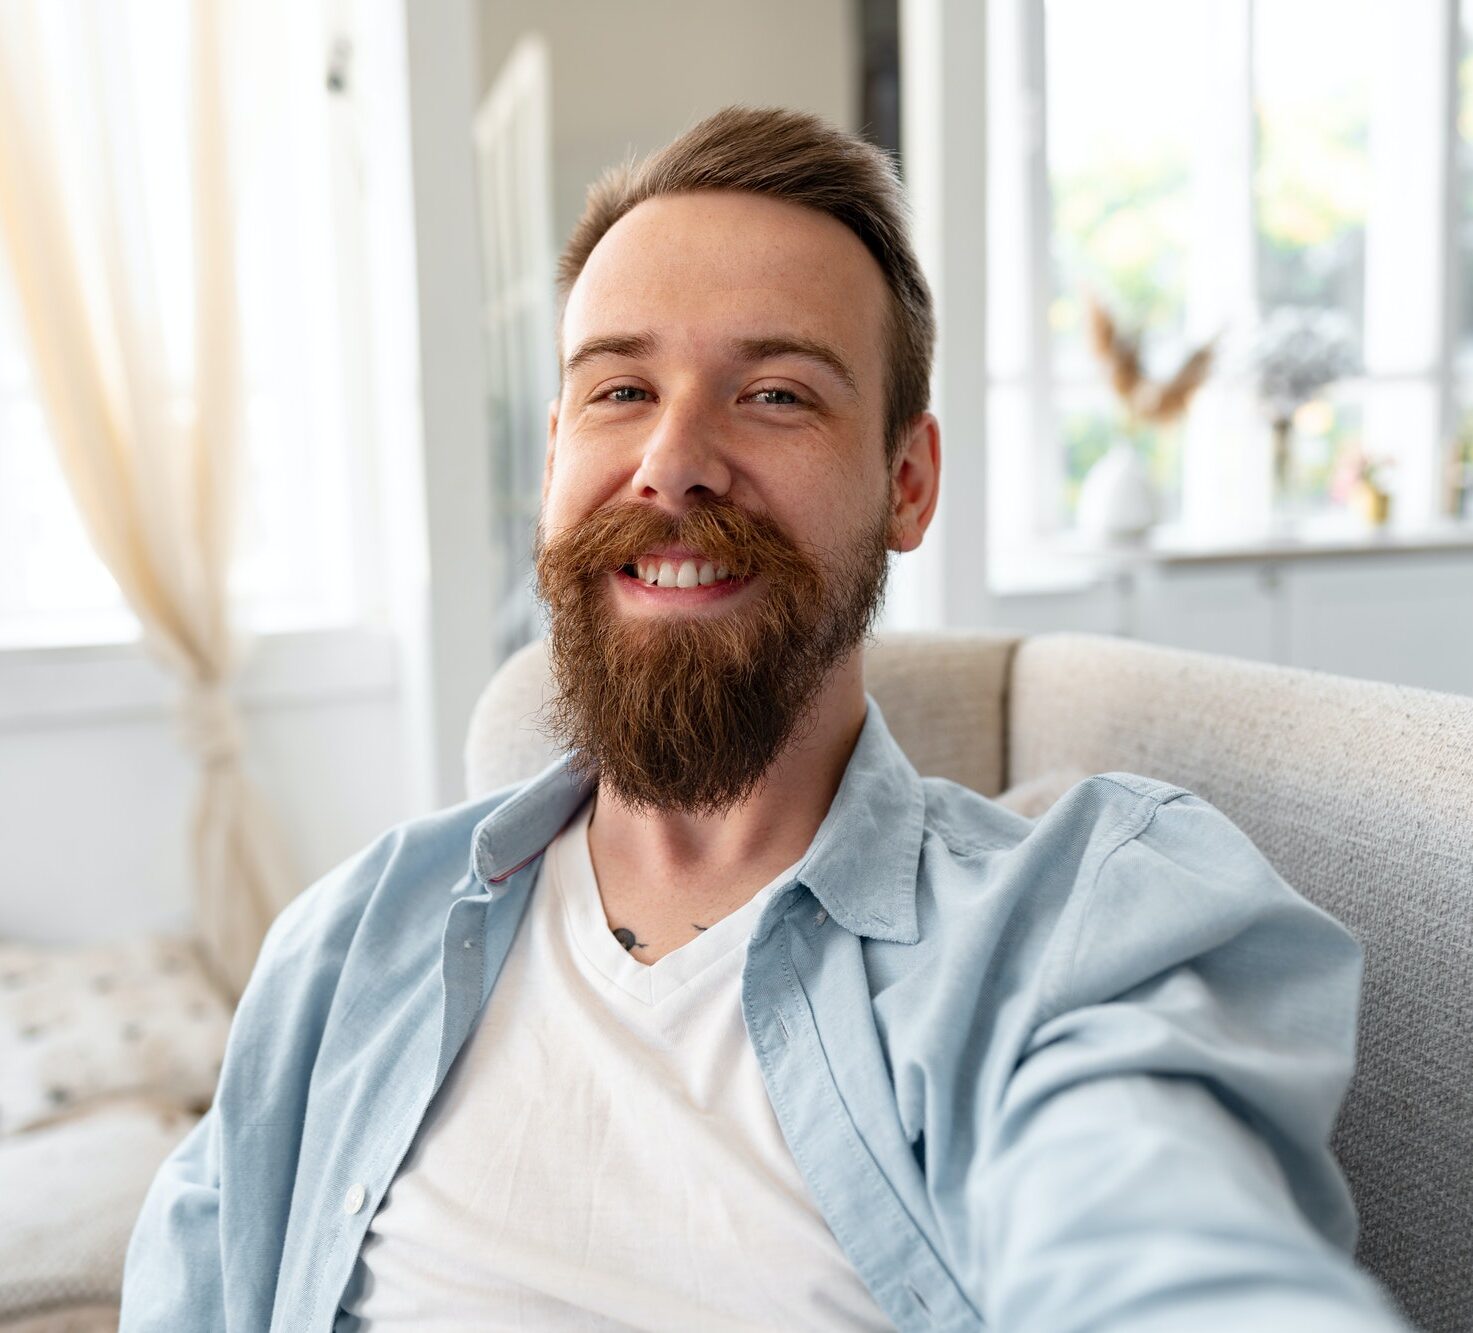 Bearded happy young man smiling and taking selfie photo while sitting on sofa at home.